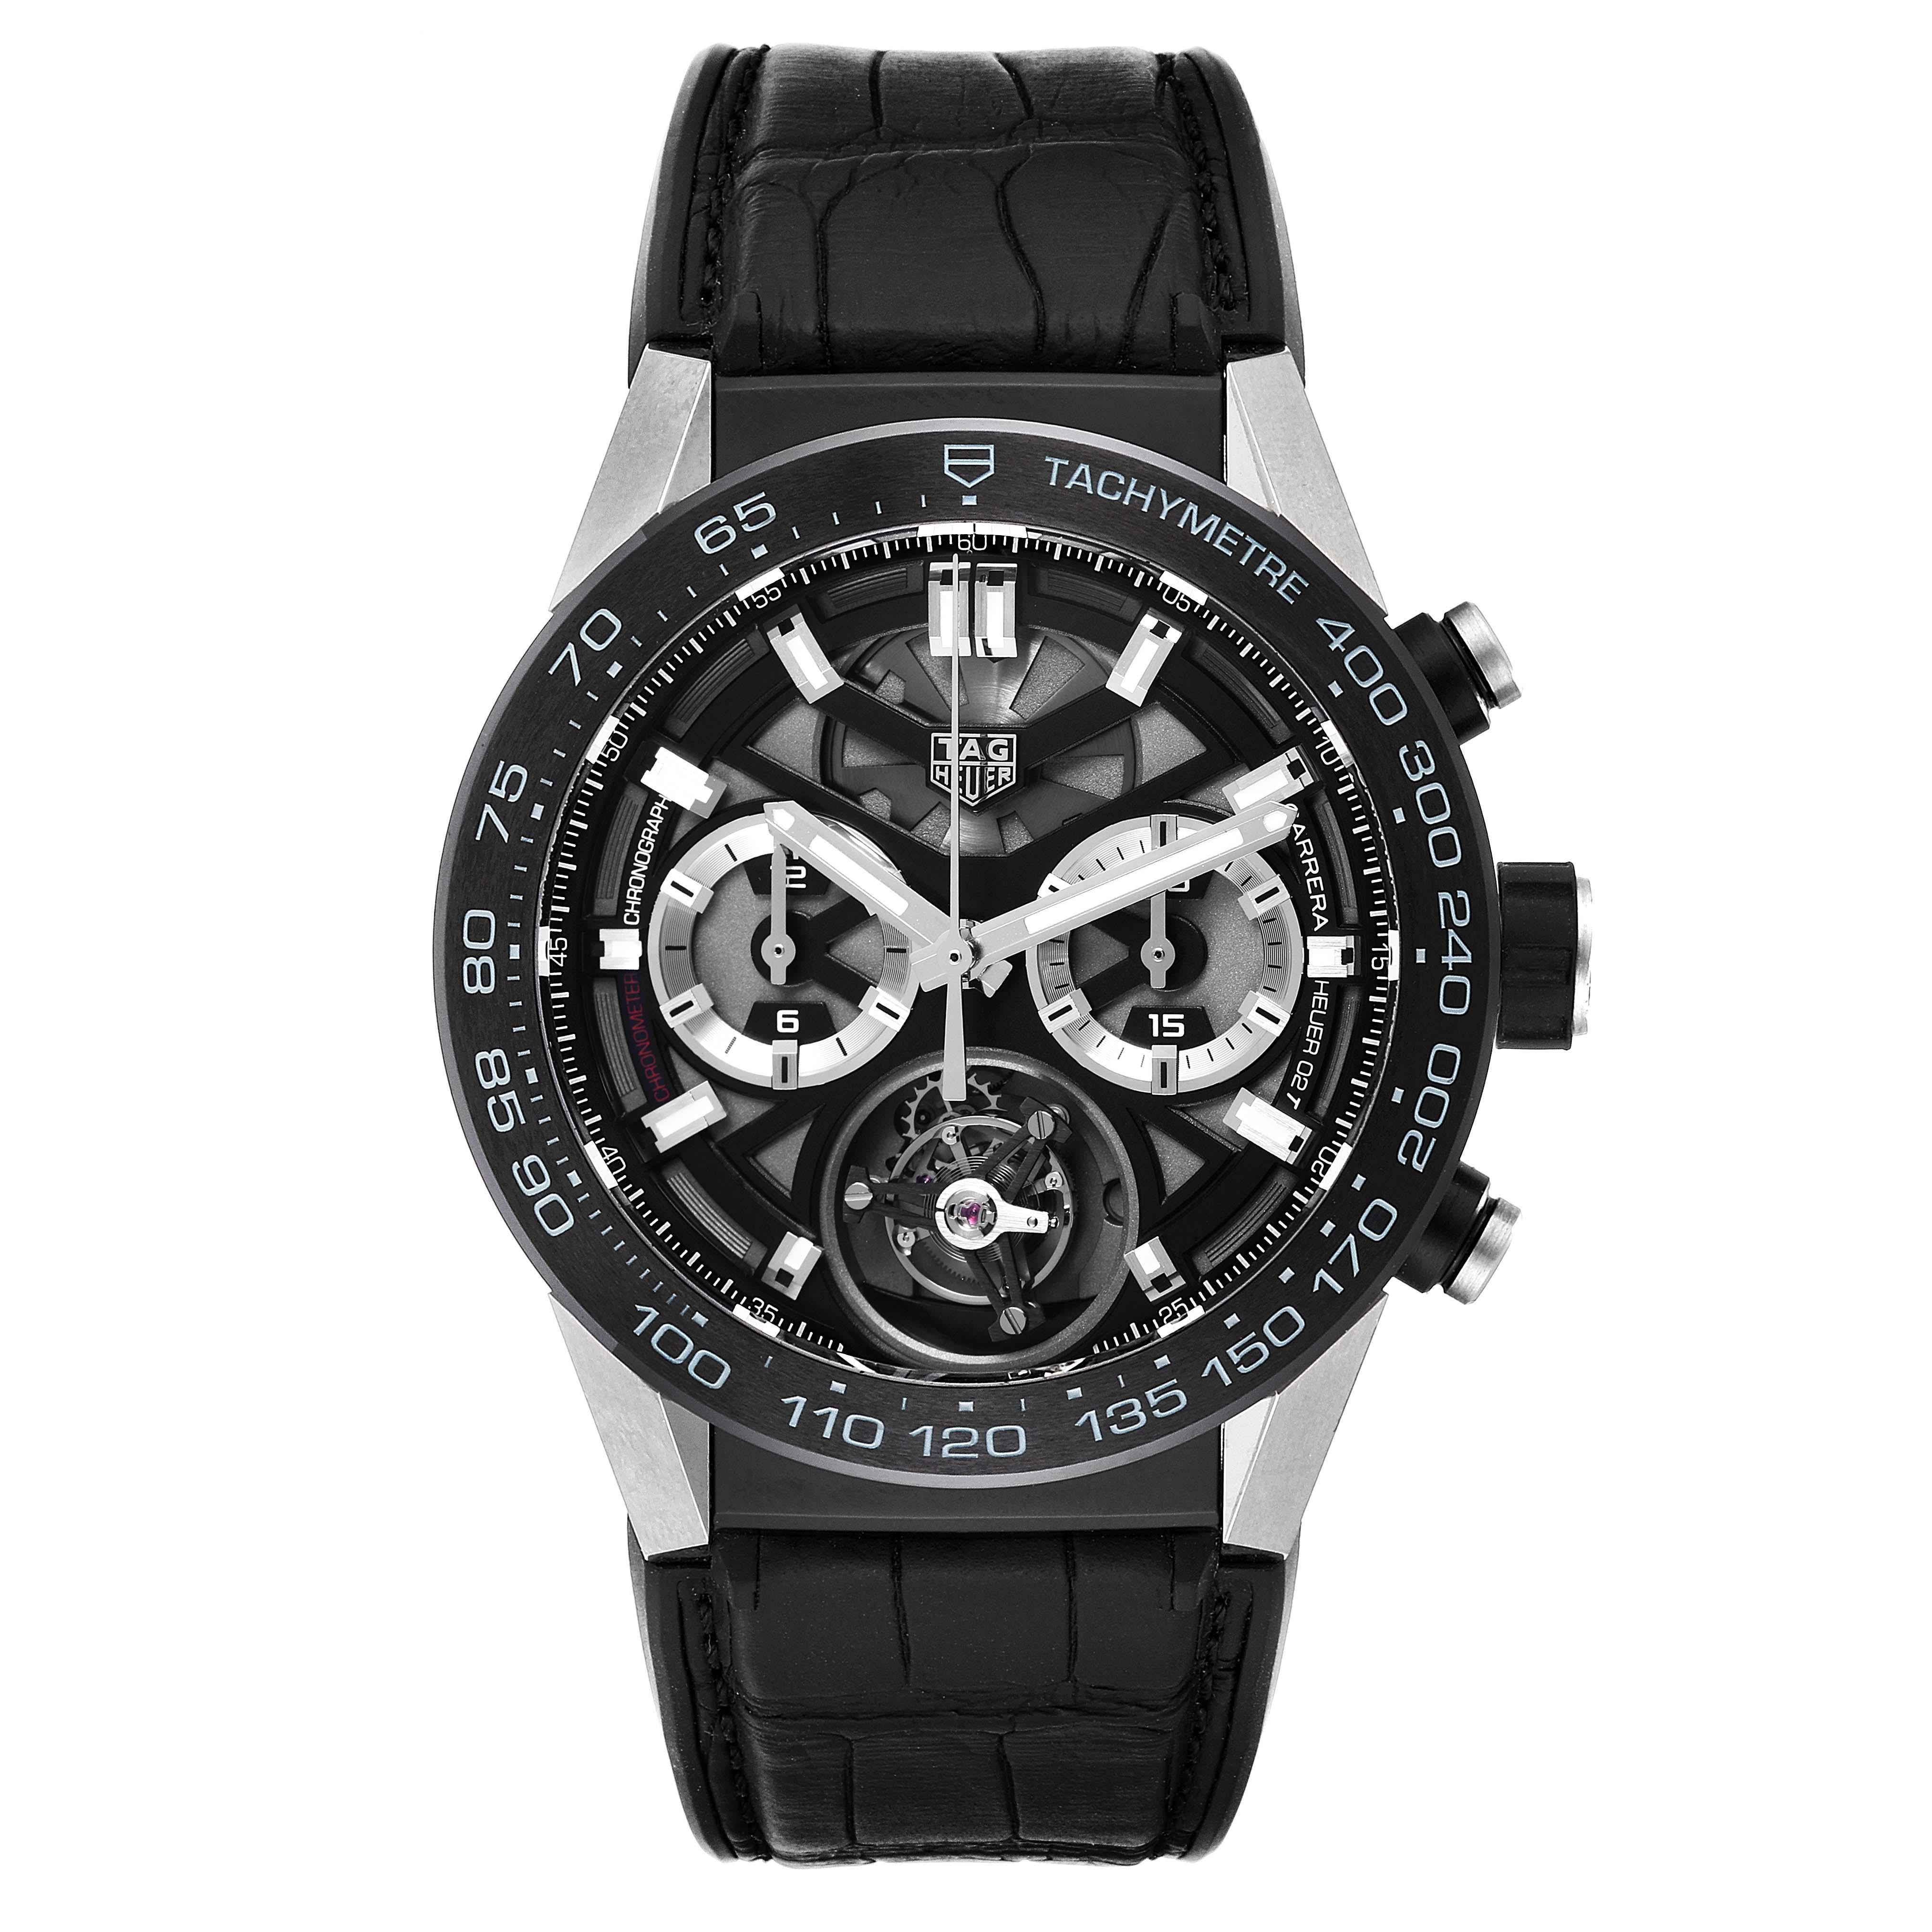 Tag Heuer Carrera Tourbillon Chronograph Titanium Mens Watch CAR5A8Y. Automatic self-winding chronograph movement. Titanium case 45.0 mm. Exhibition transperent sapphire crystal back. Black brushed ceramic bezel with tachymeter scale. Scratch